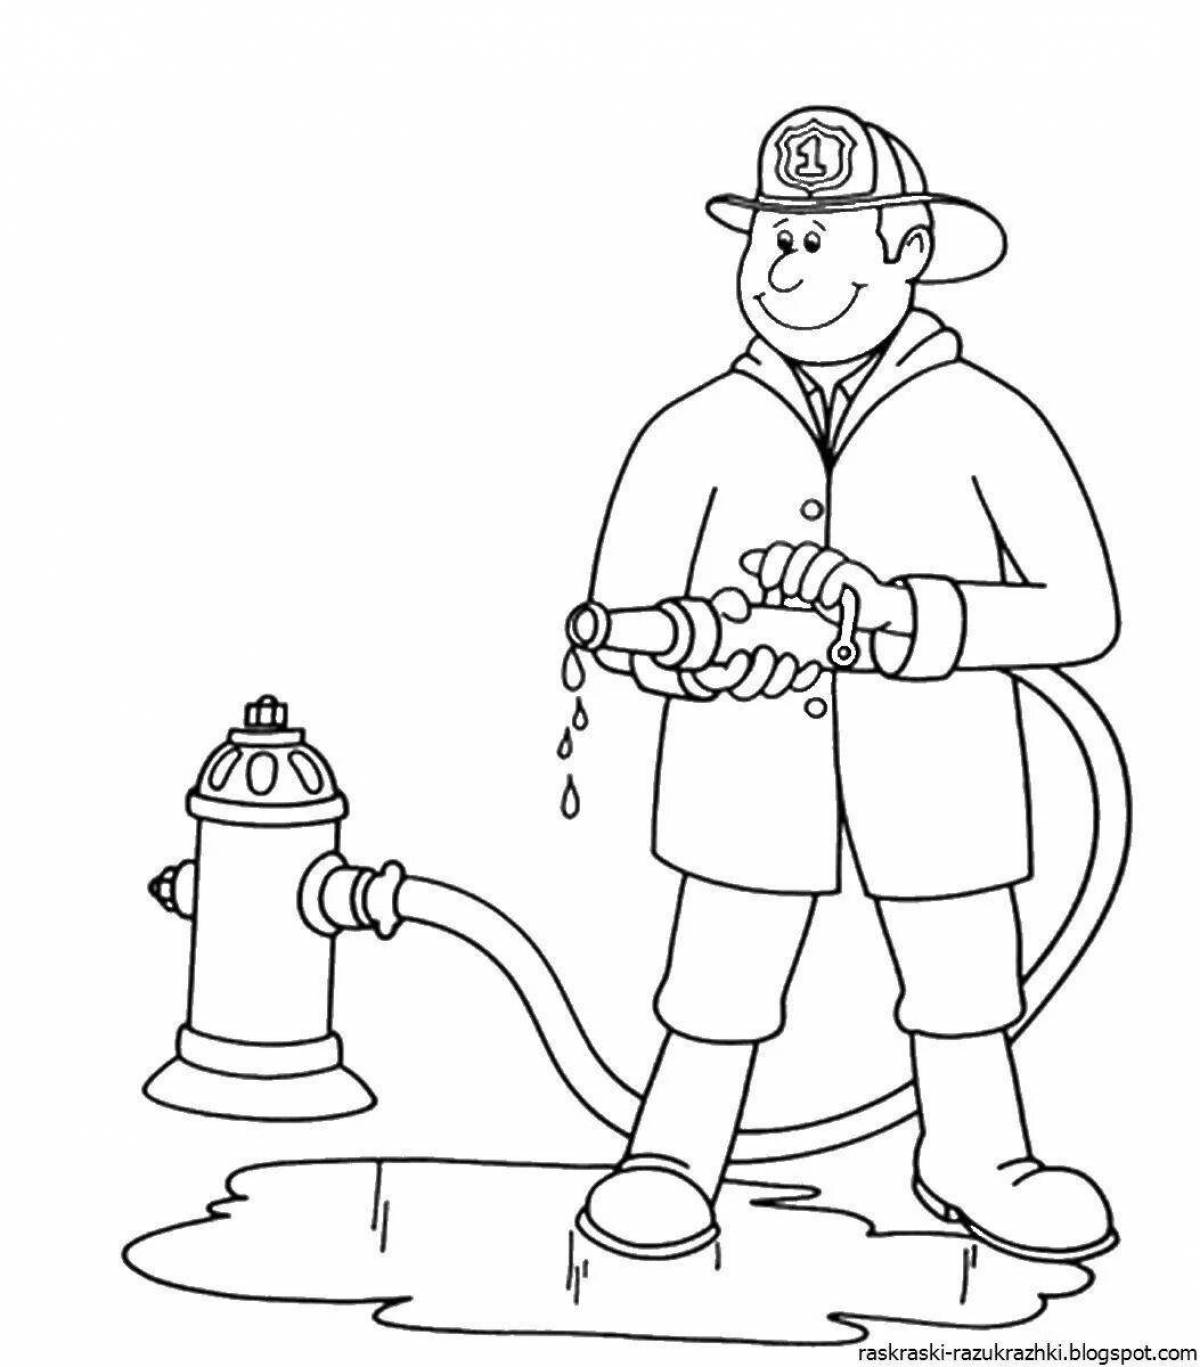 Coloring book amazing profession of a firefighter